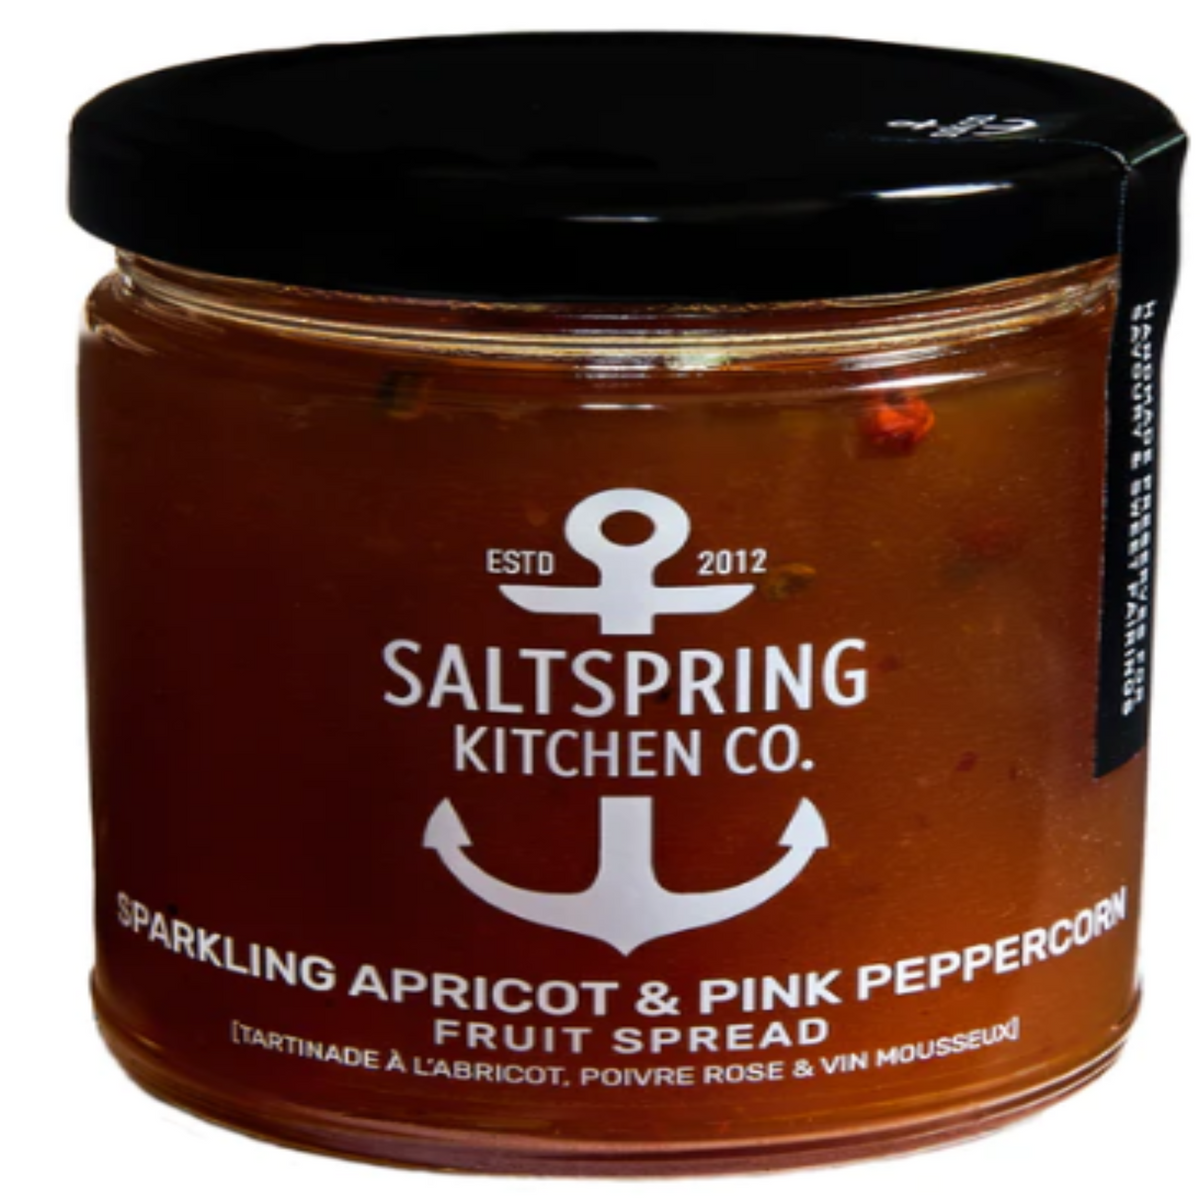 Sparkling Apricot And Pink Peppercorn